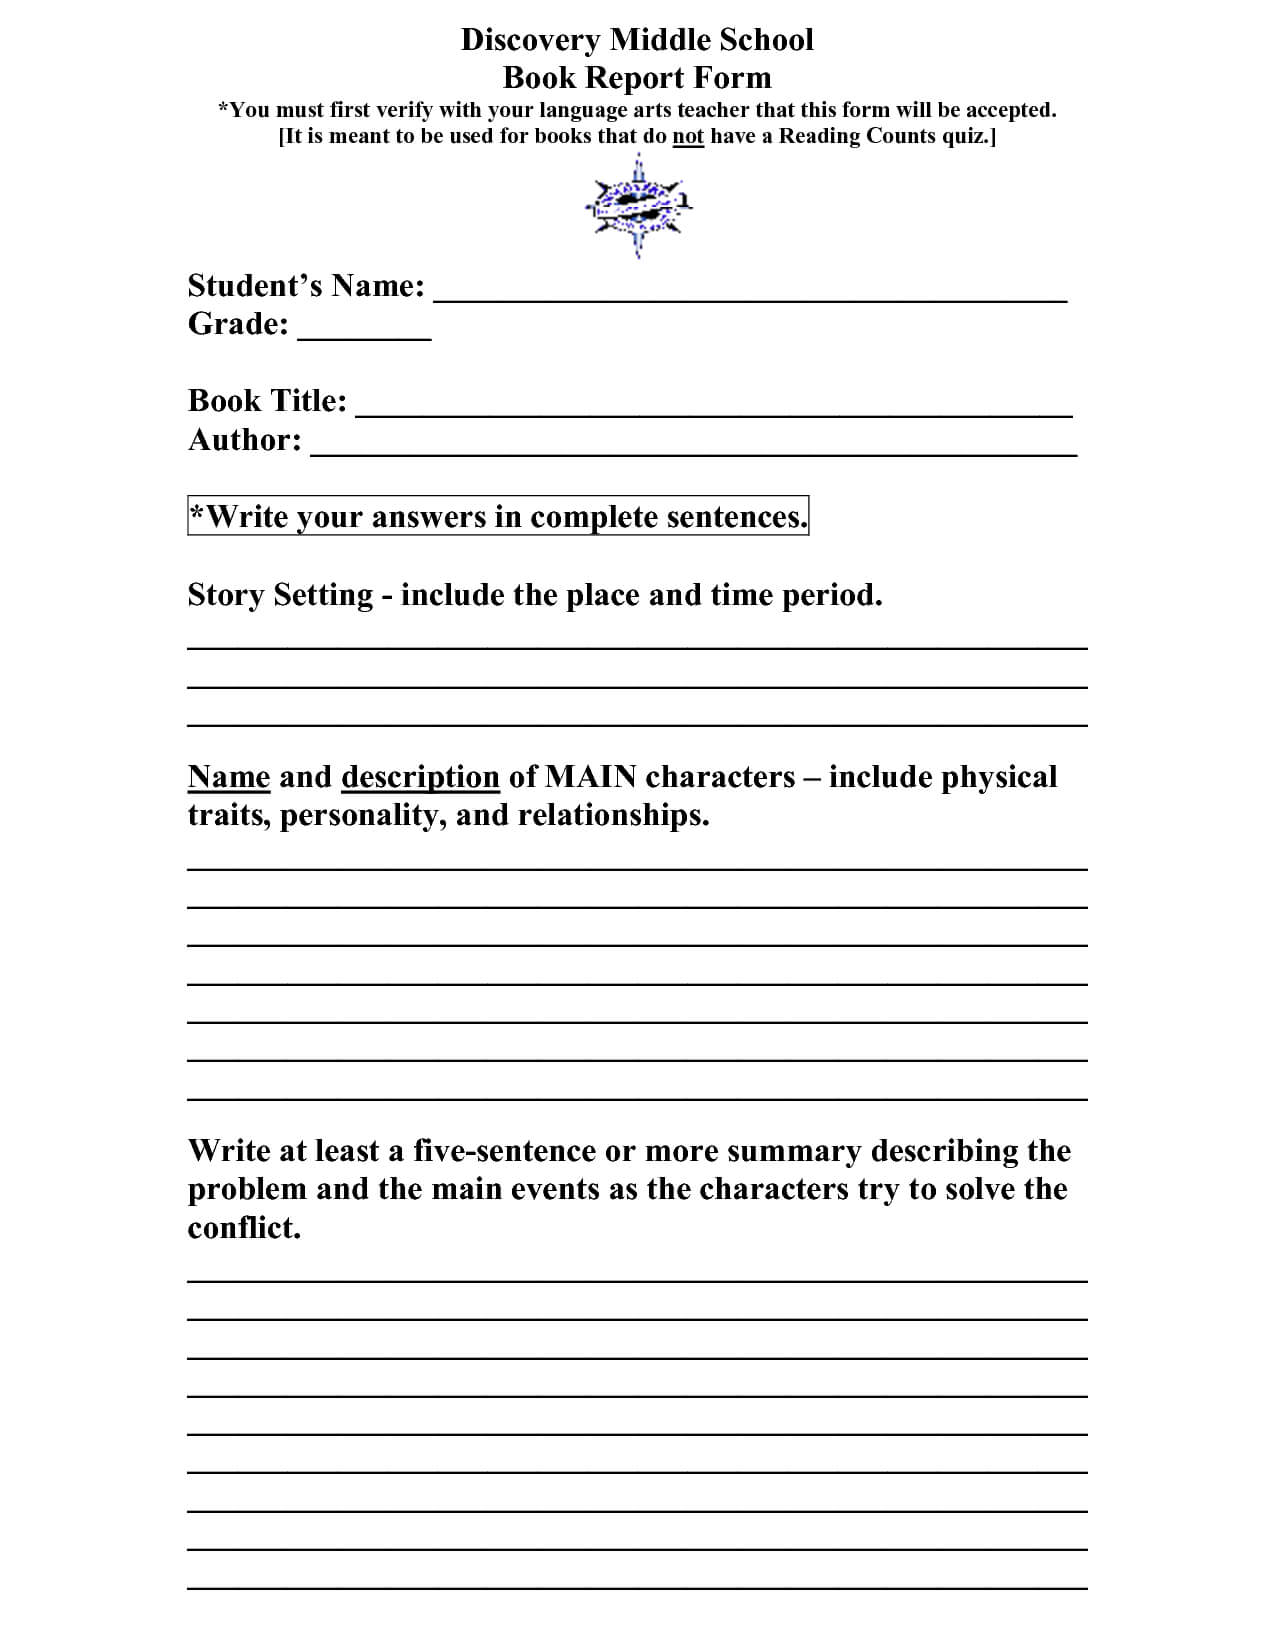 Scope Of Work Template | Teaching & Learning | Middle School For Book Report Template High School